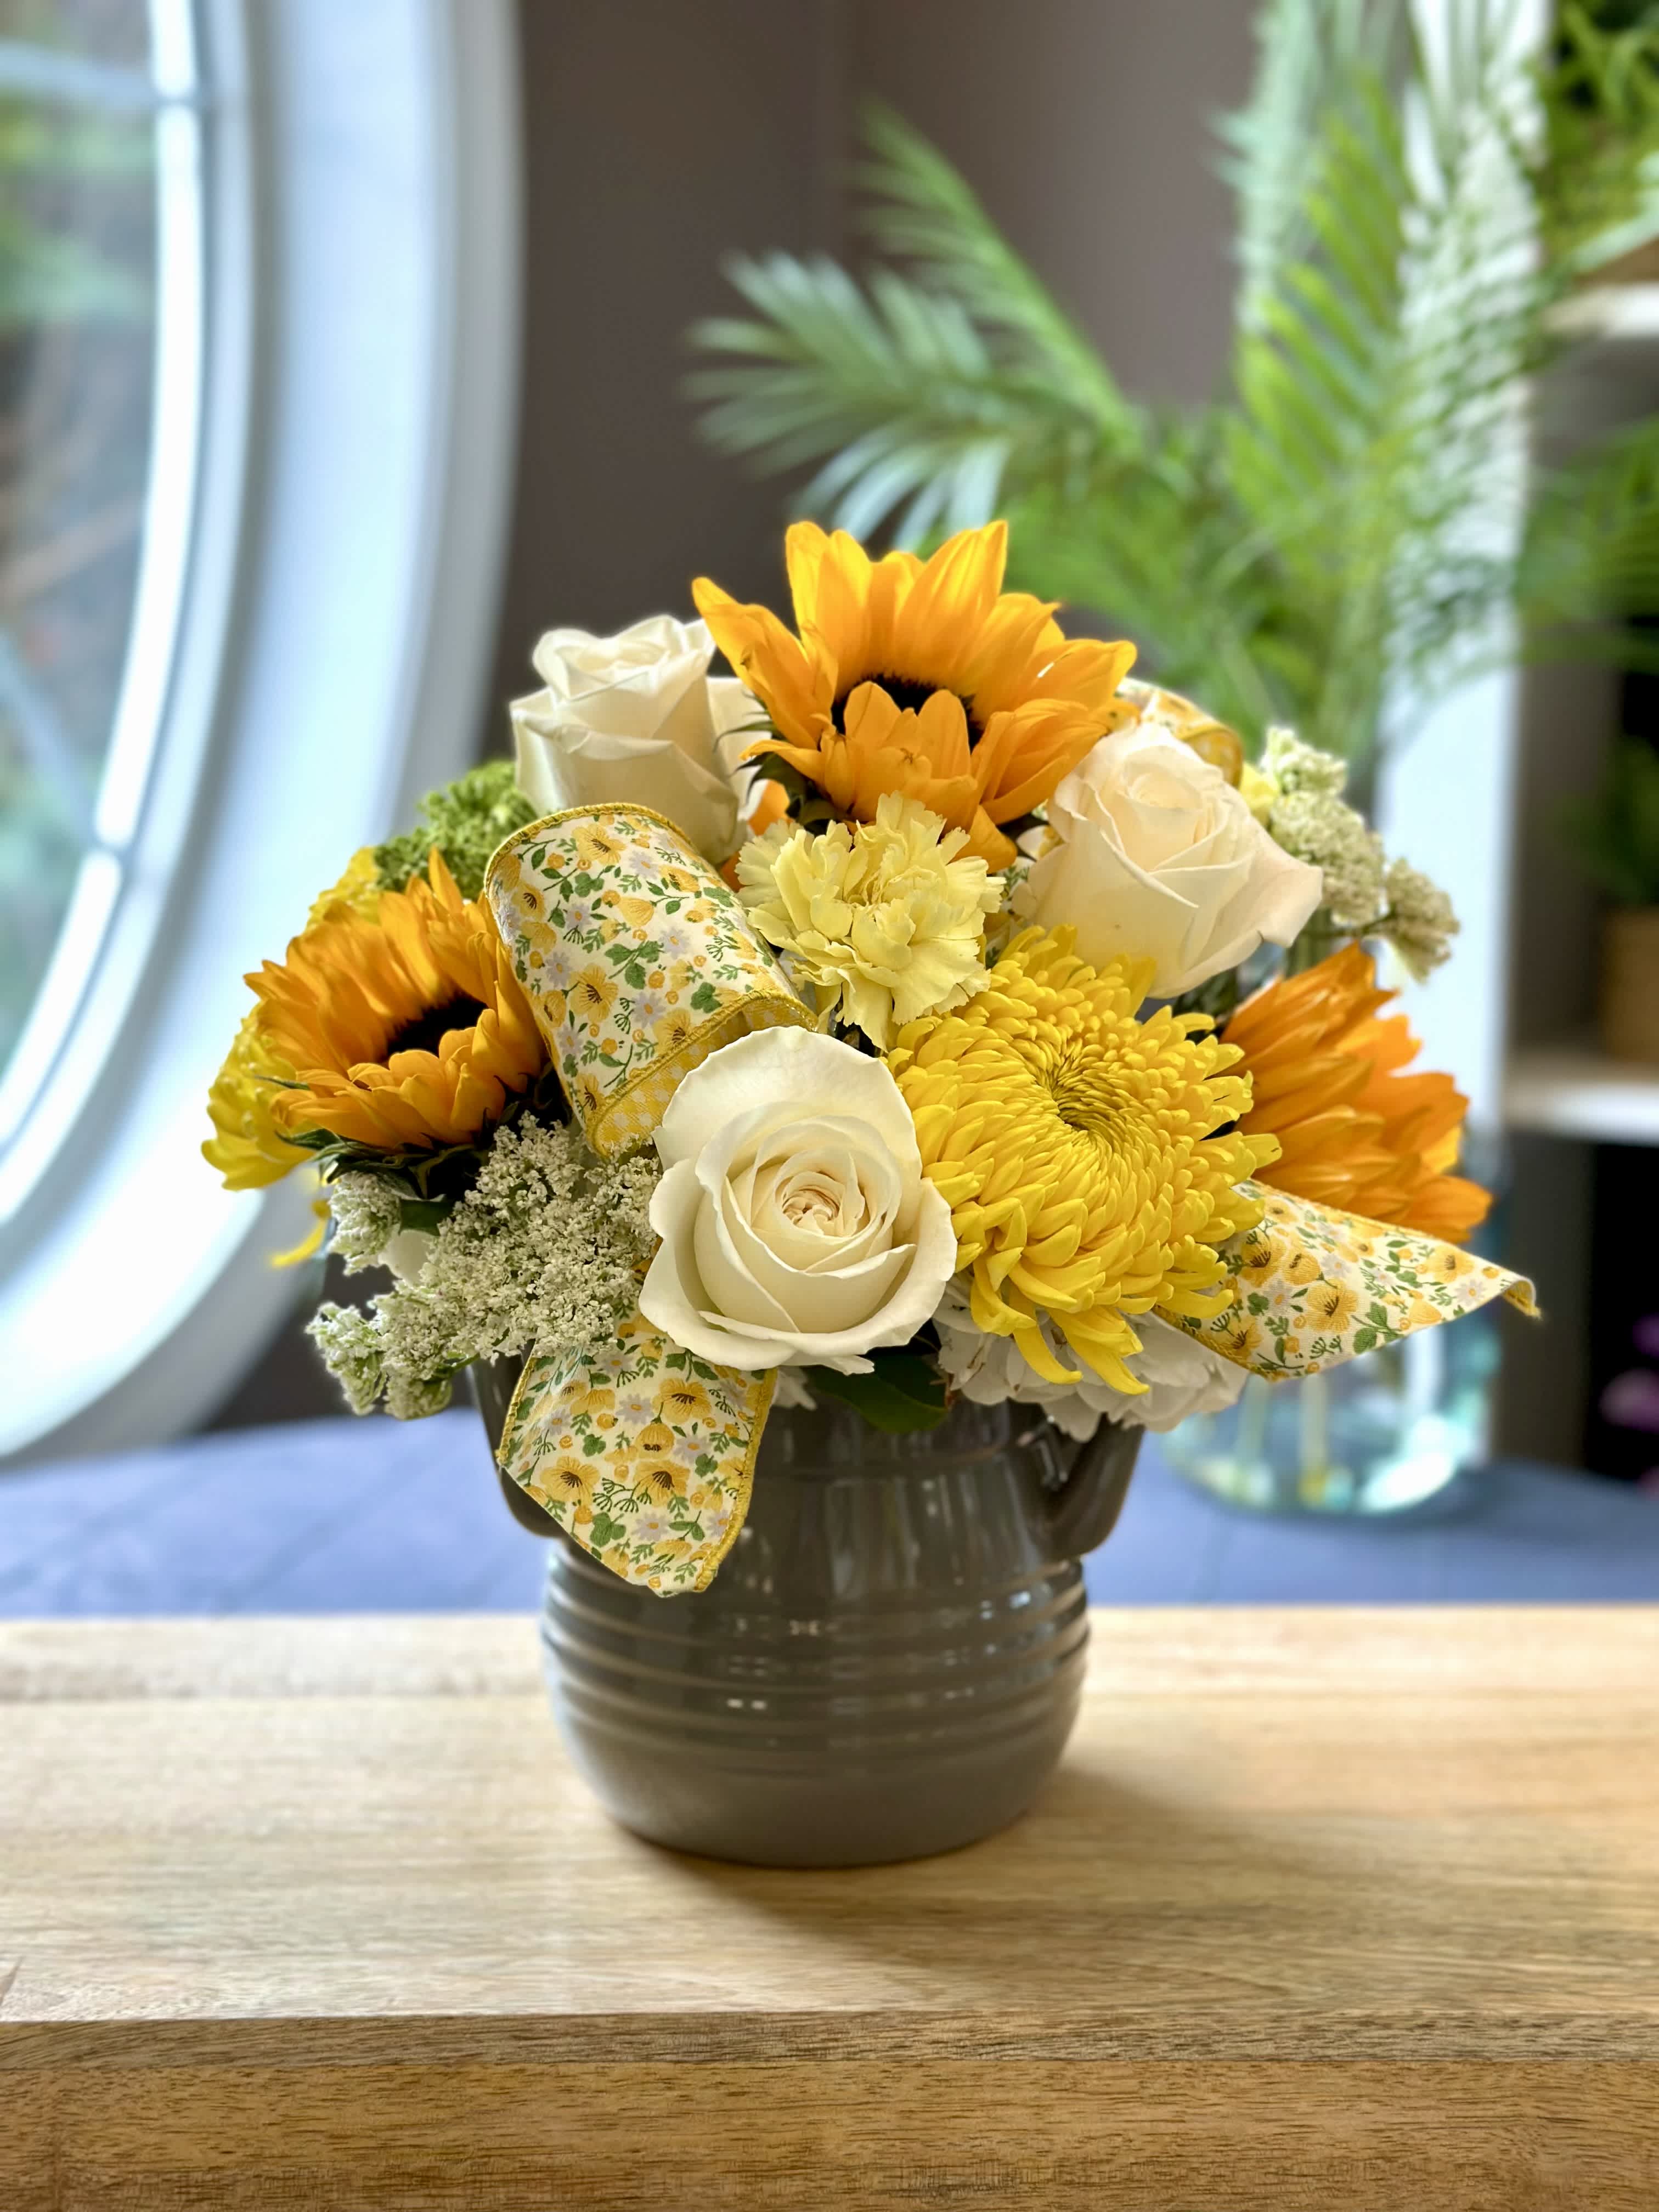 Homemade Memories - Mix of white and yellow fresh flowers that includes; sunflowers, roses, carnations, mums, with simple touches of greenery. Designed in a nice keepsake gray ceramic crock. FLOWERS &amp; COLORS MAY VARY! ONLY AVAILABLE FOR LOCAL DELIVERY!